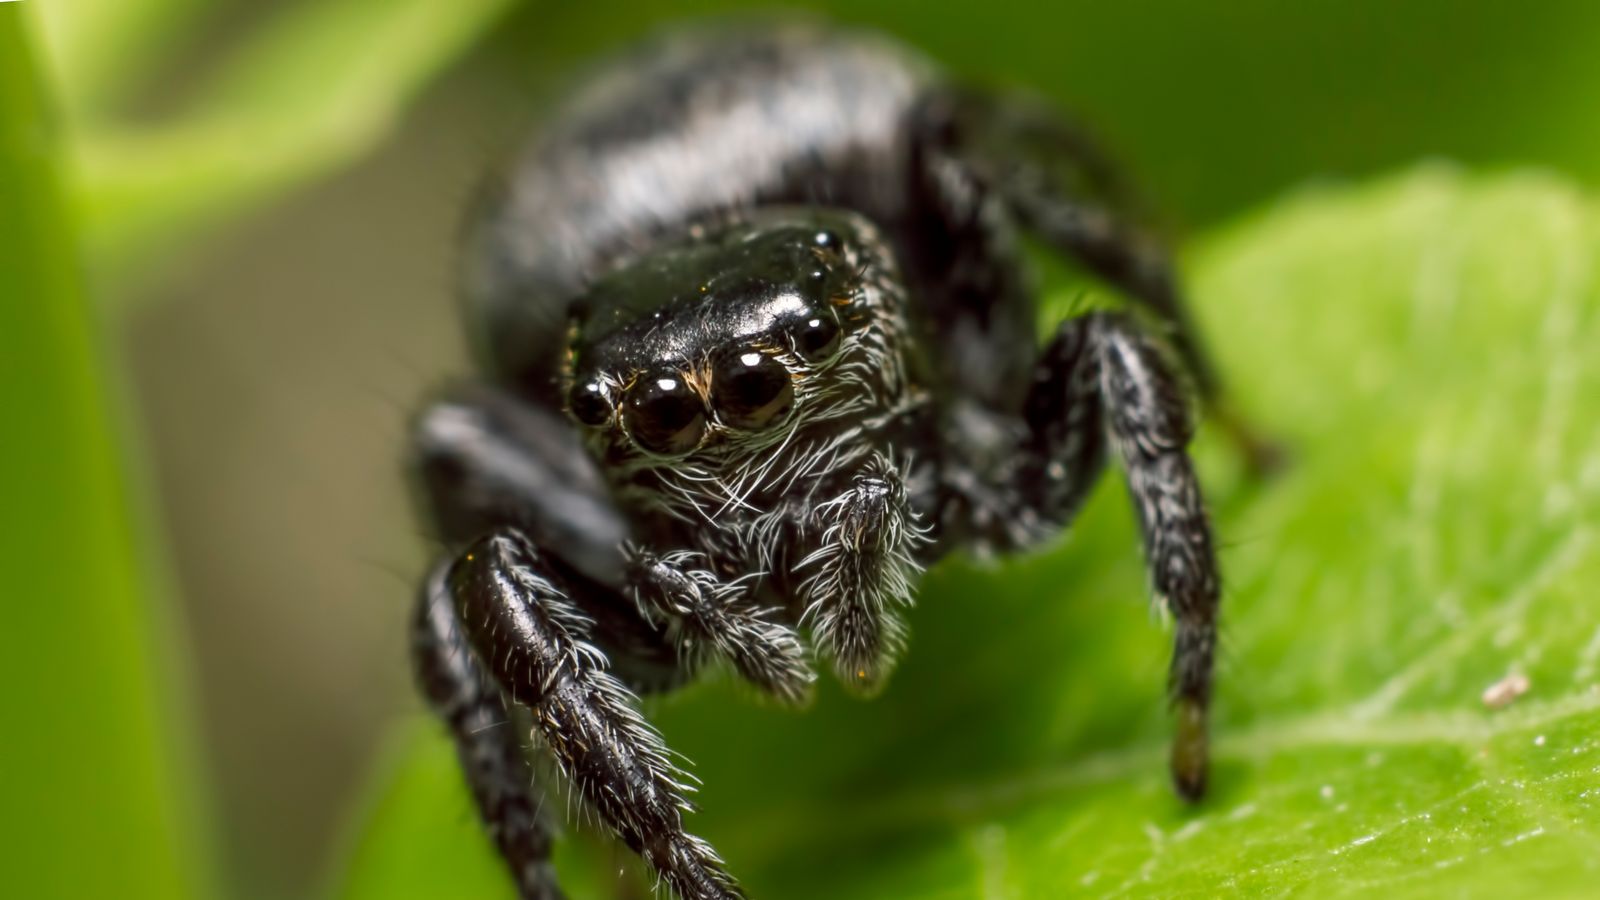 Scientists find a colorful jumping spider that is color blind •